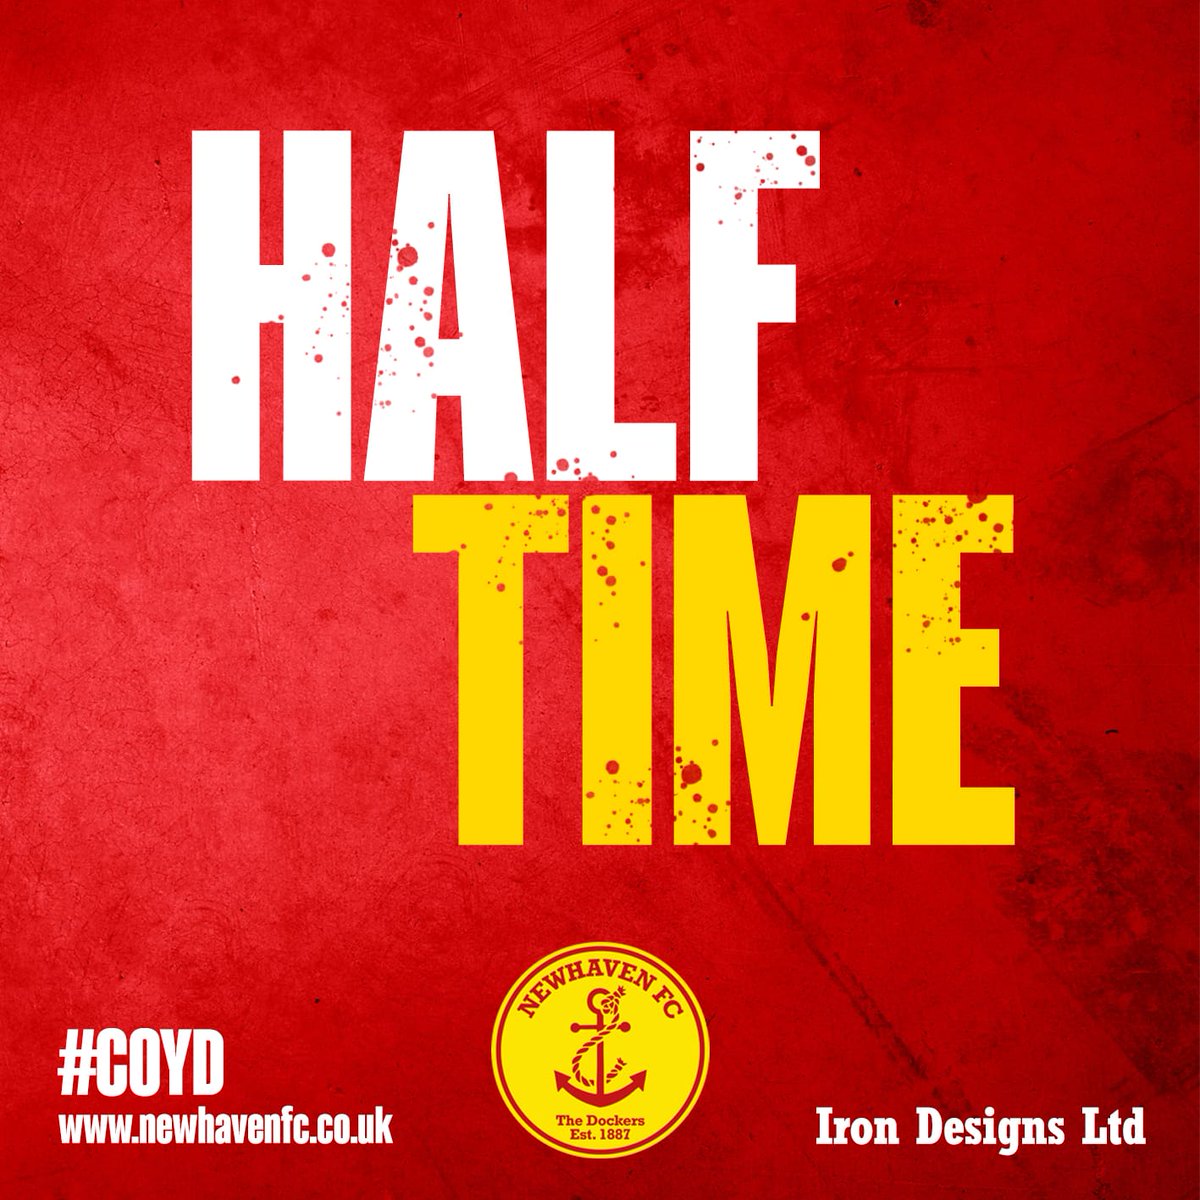 Ten-man Hassocks lead at the break. And they've looked comfortable in truth since being reduced to ten.
1-0